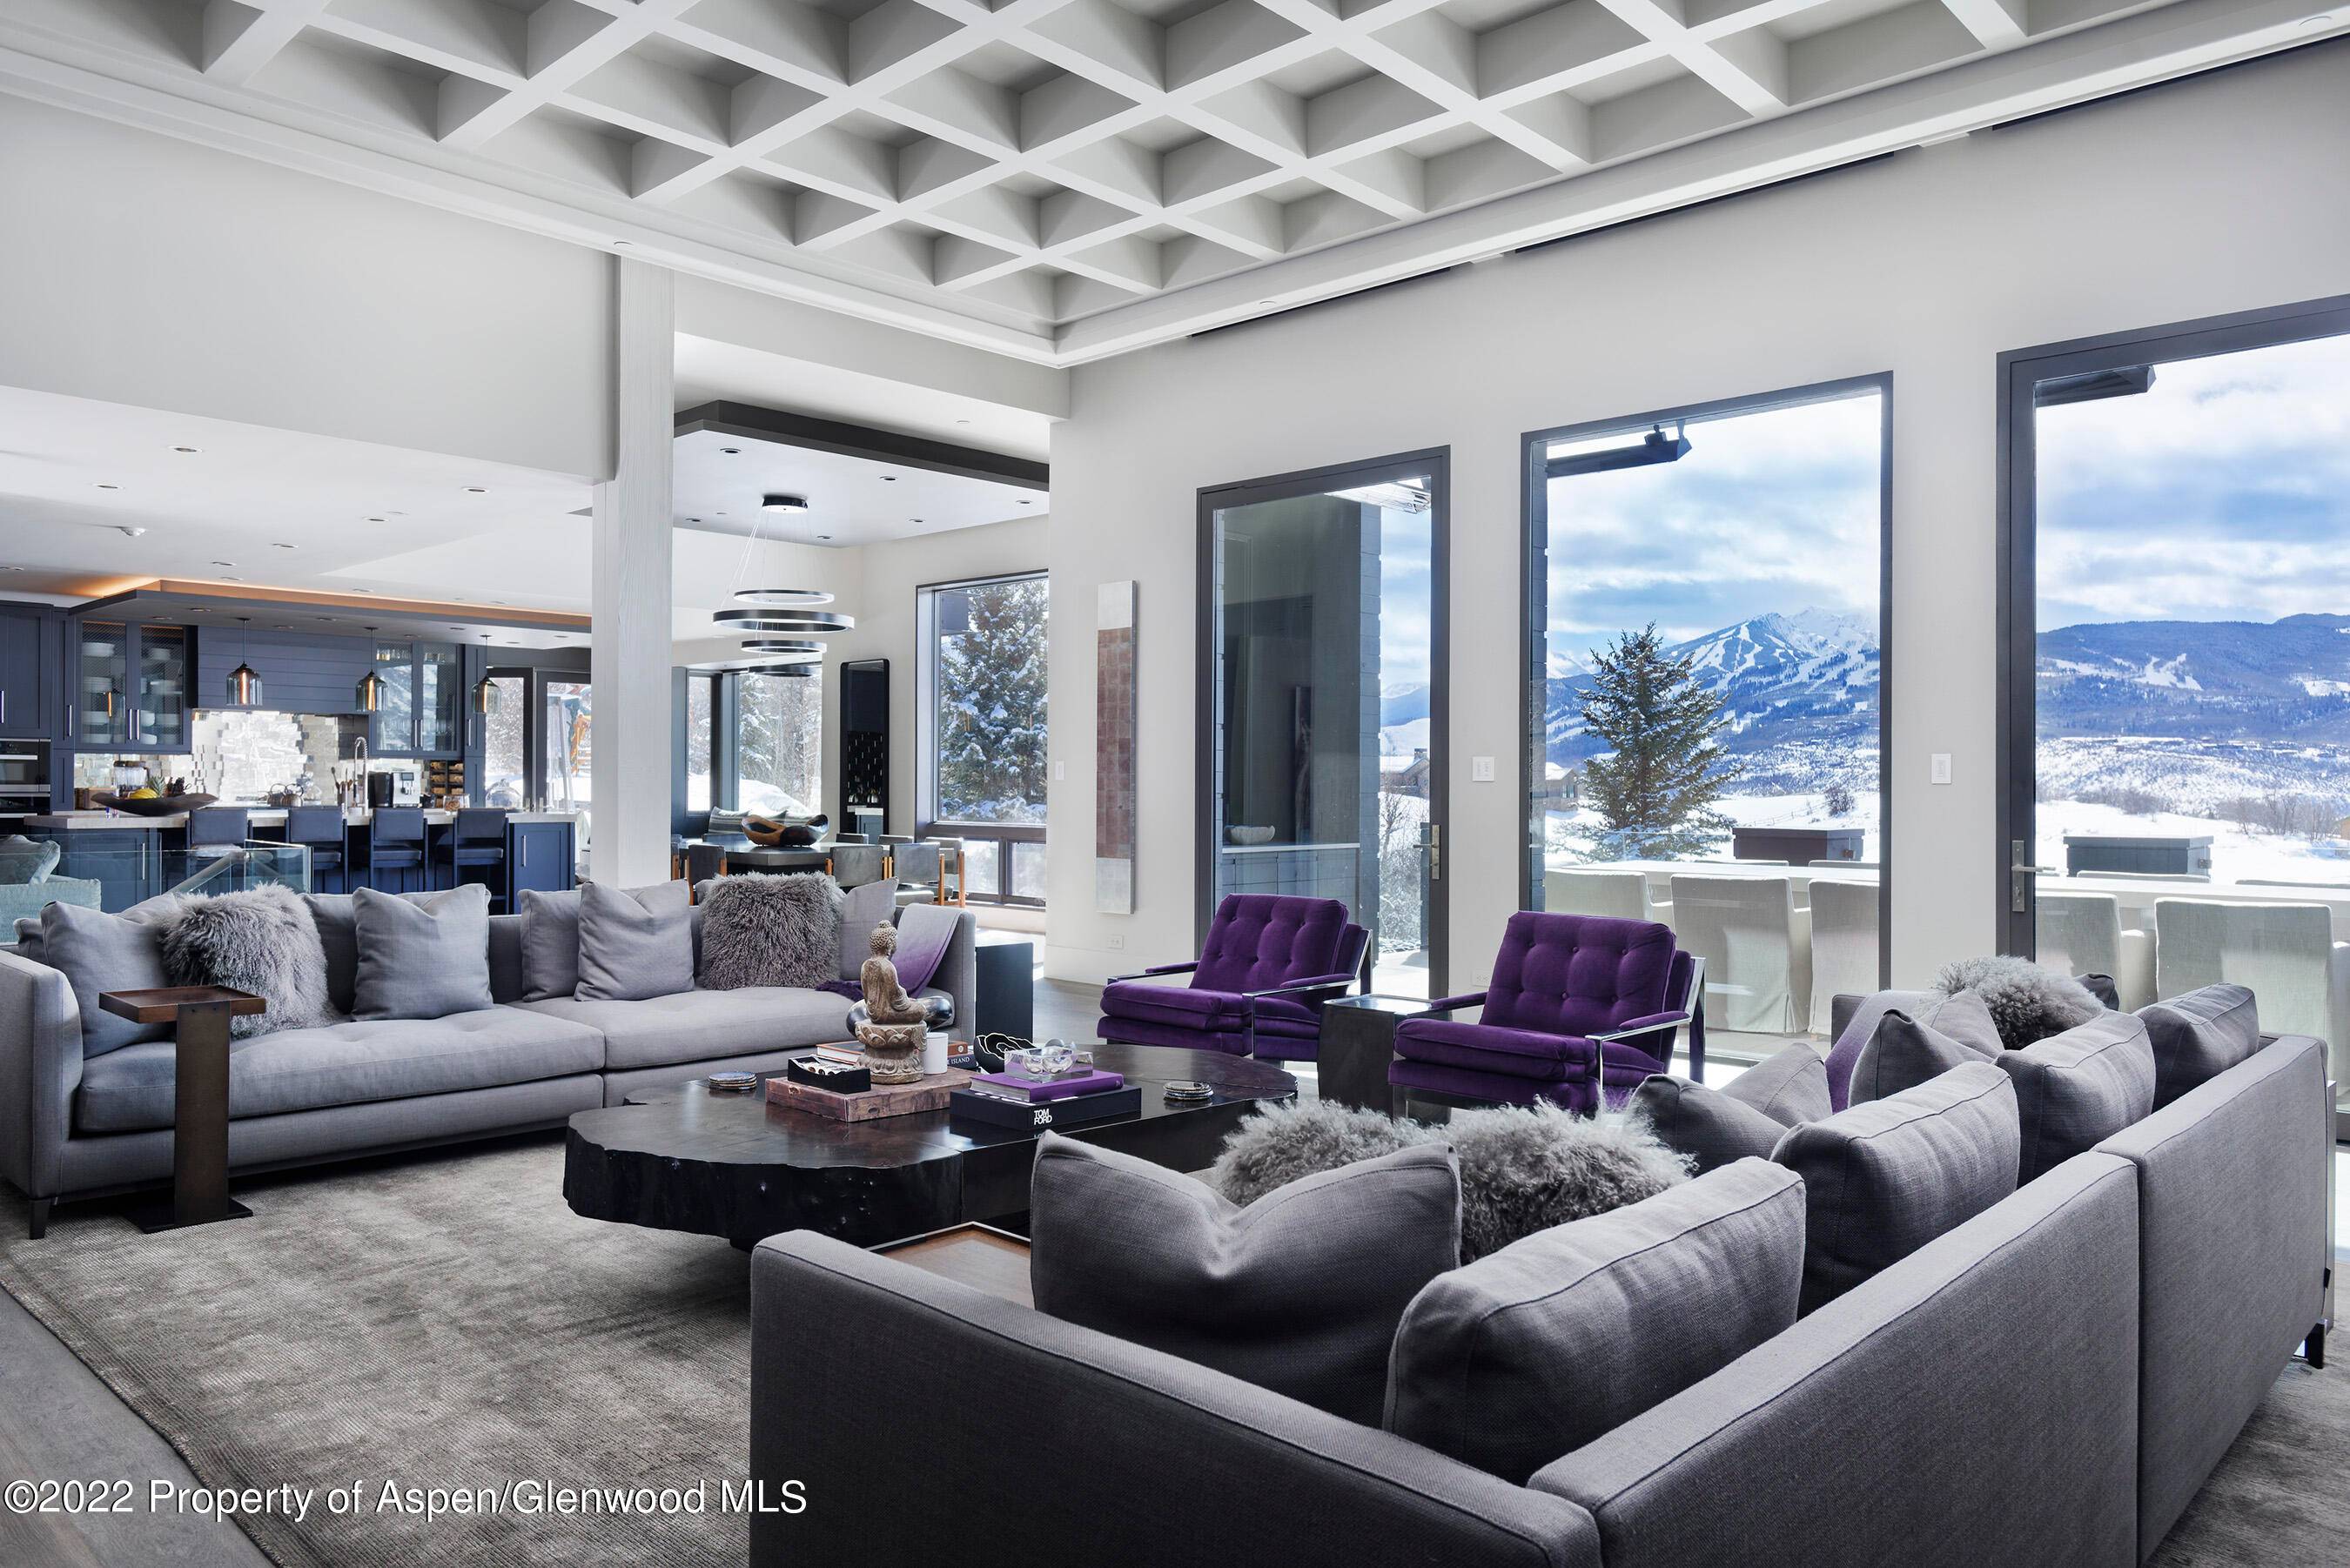 Take in panoramic mountain views from the floor to ceiling windows in this two story home that seamlessly incorporates natural light and a sense of place here in the mountains.